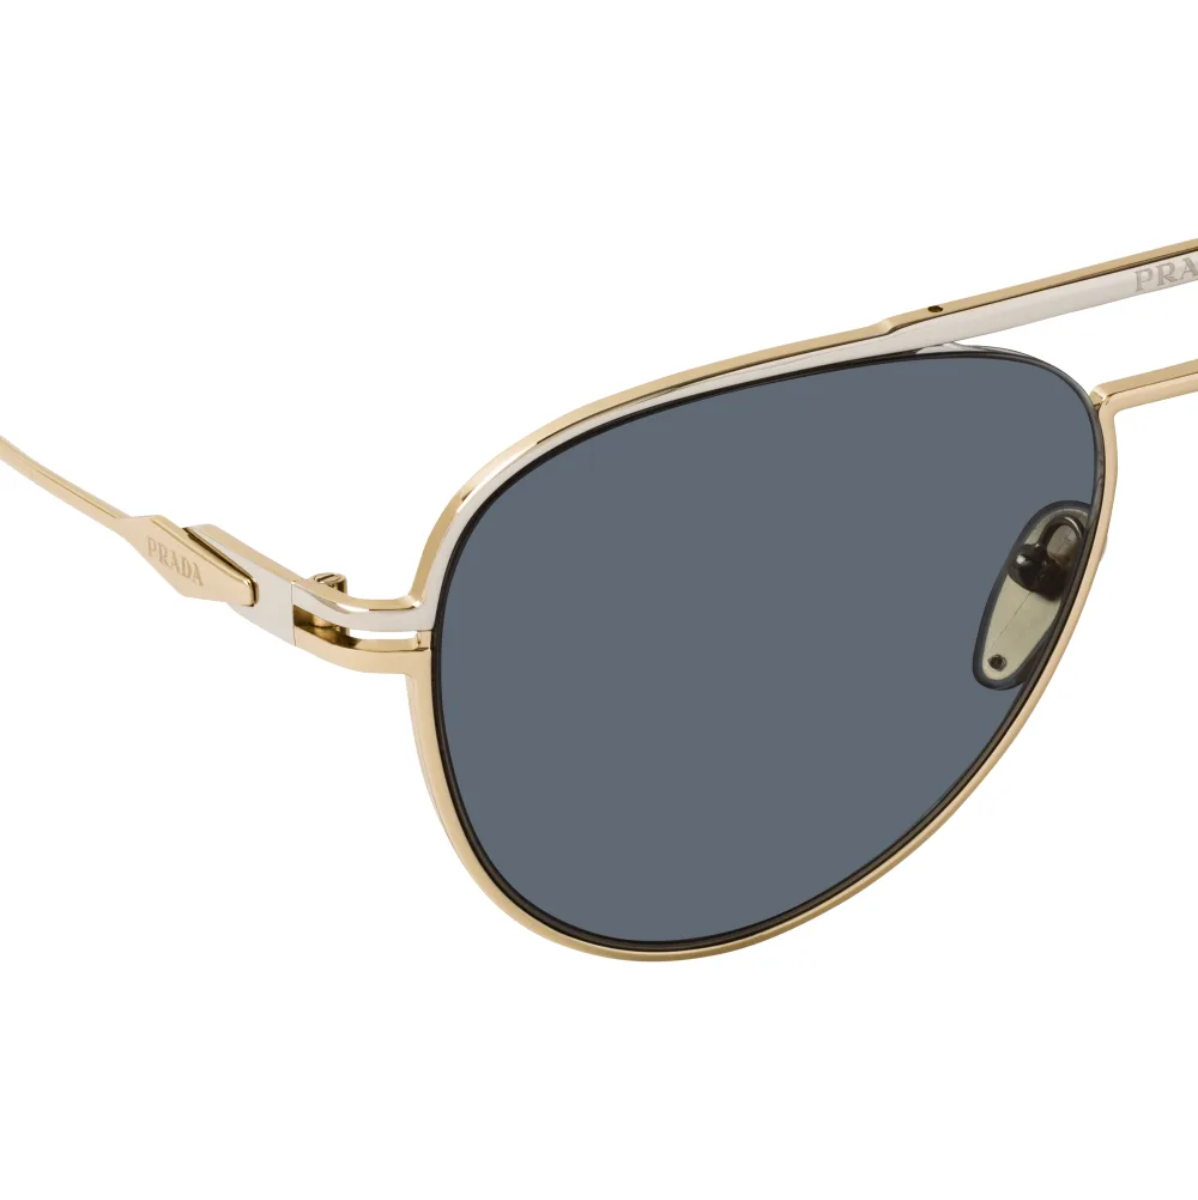  "Discover the latest in Prada eyewear for men at Optorium, featuring the authentic Prada SPR 54Z 17F 09T Gold aviator sunglasses. Elevate your look with designer shades you'll love."